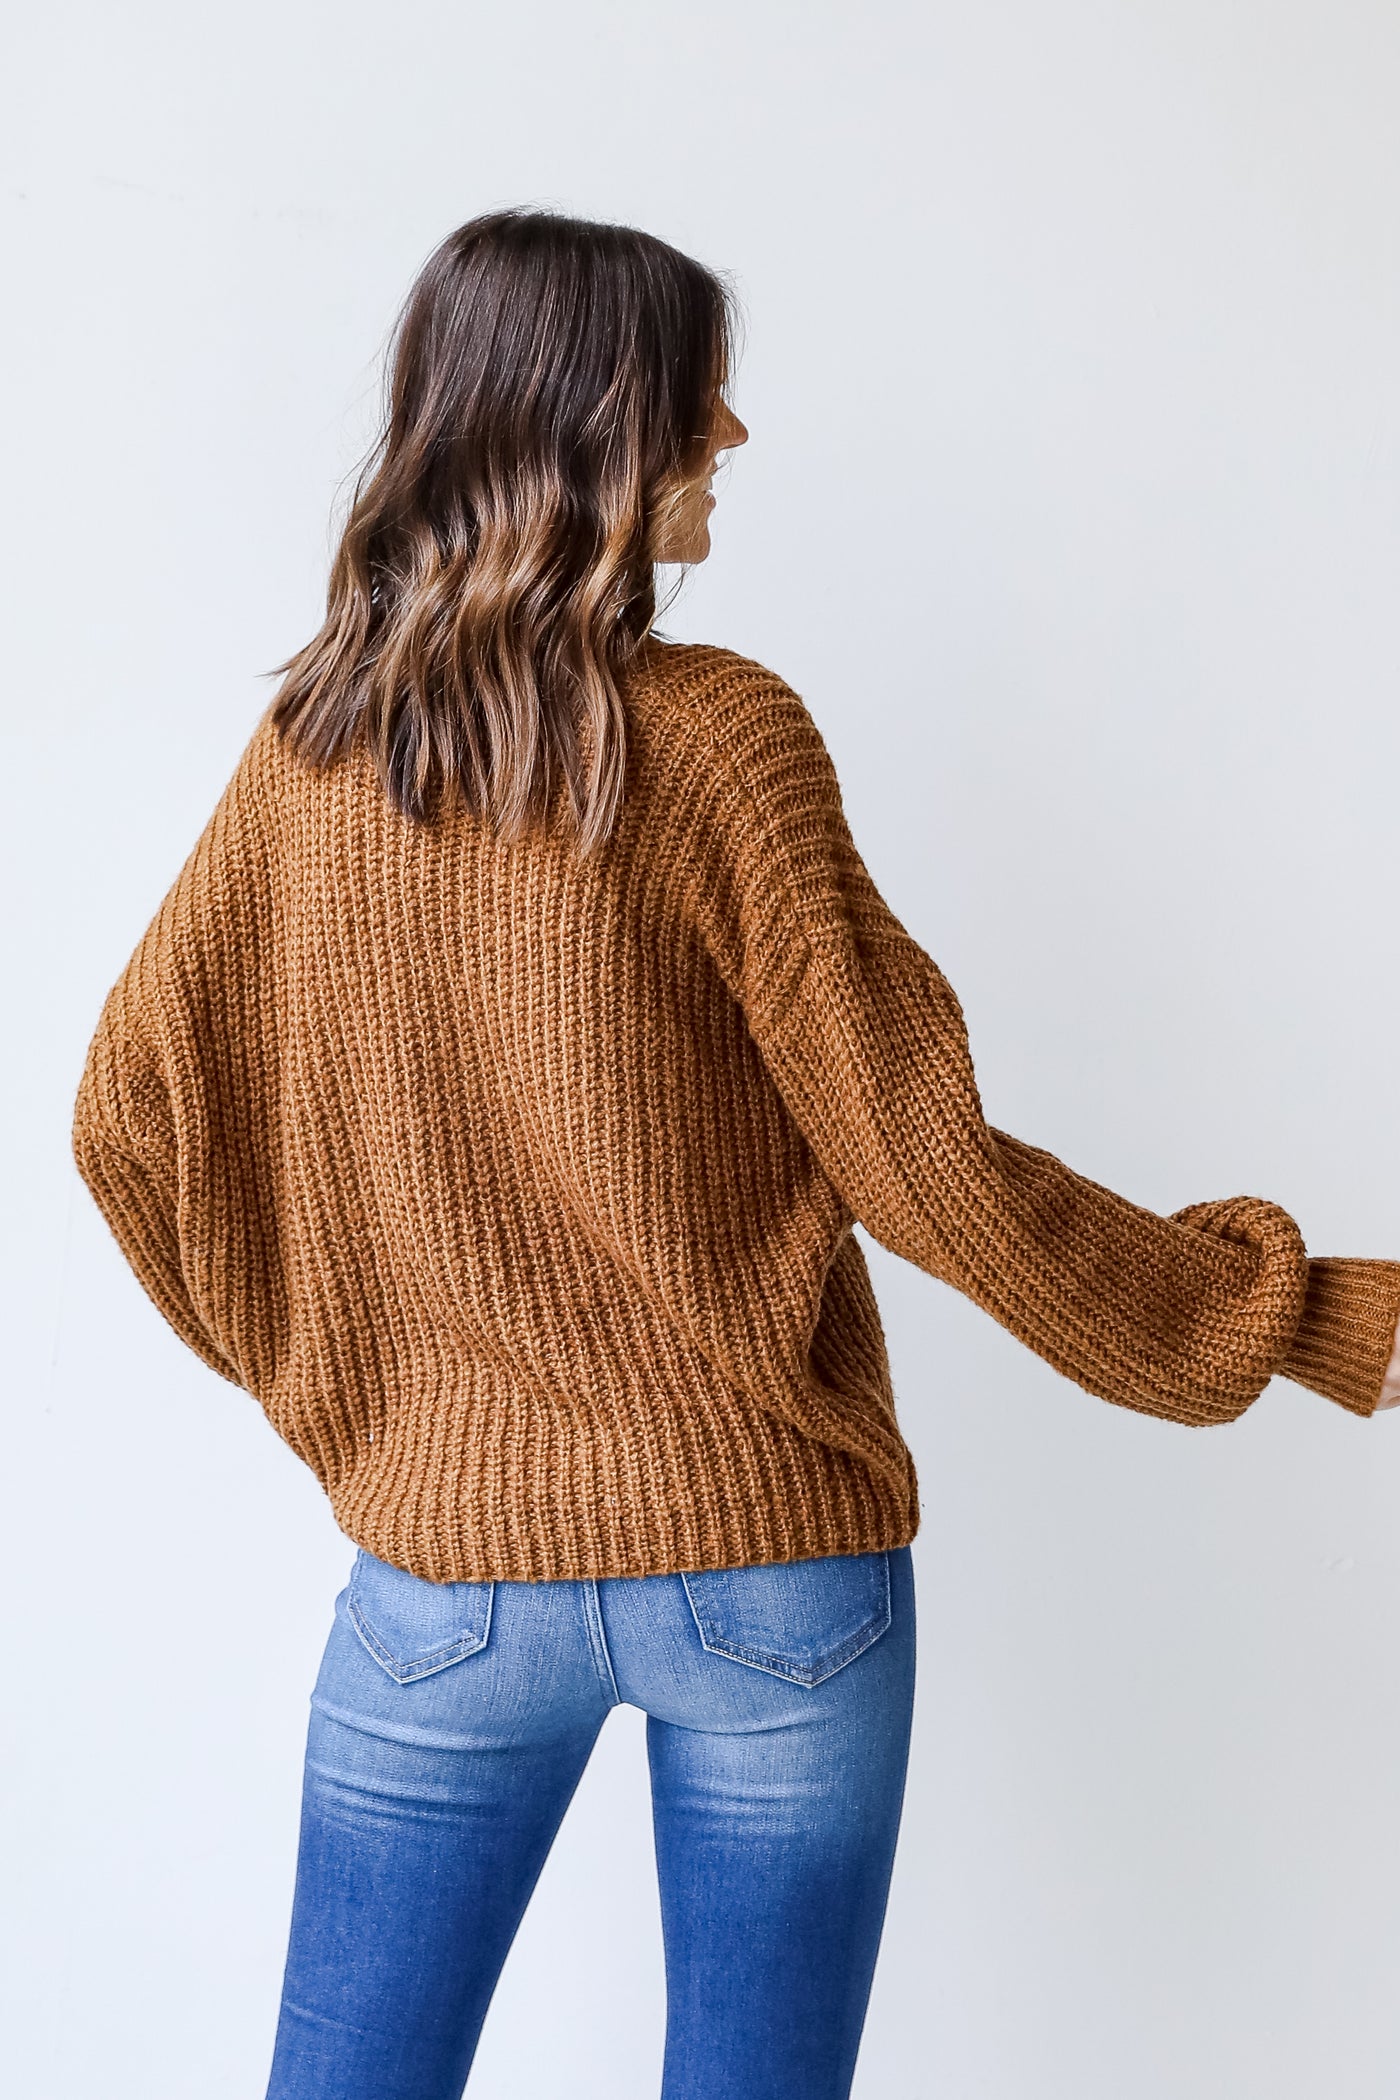 Sweater Cardigan in camel back view